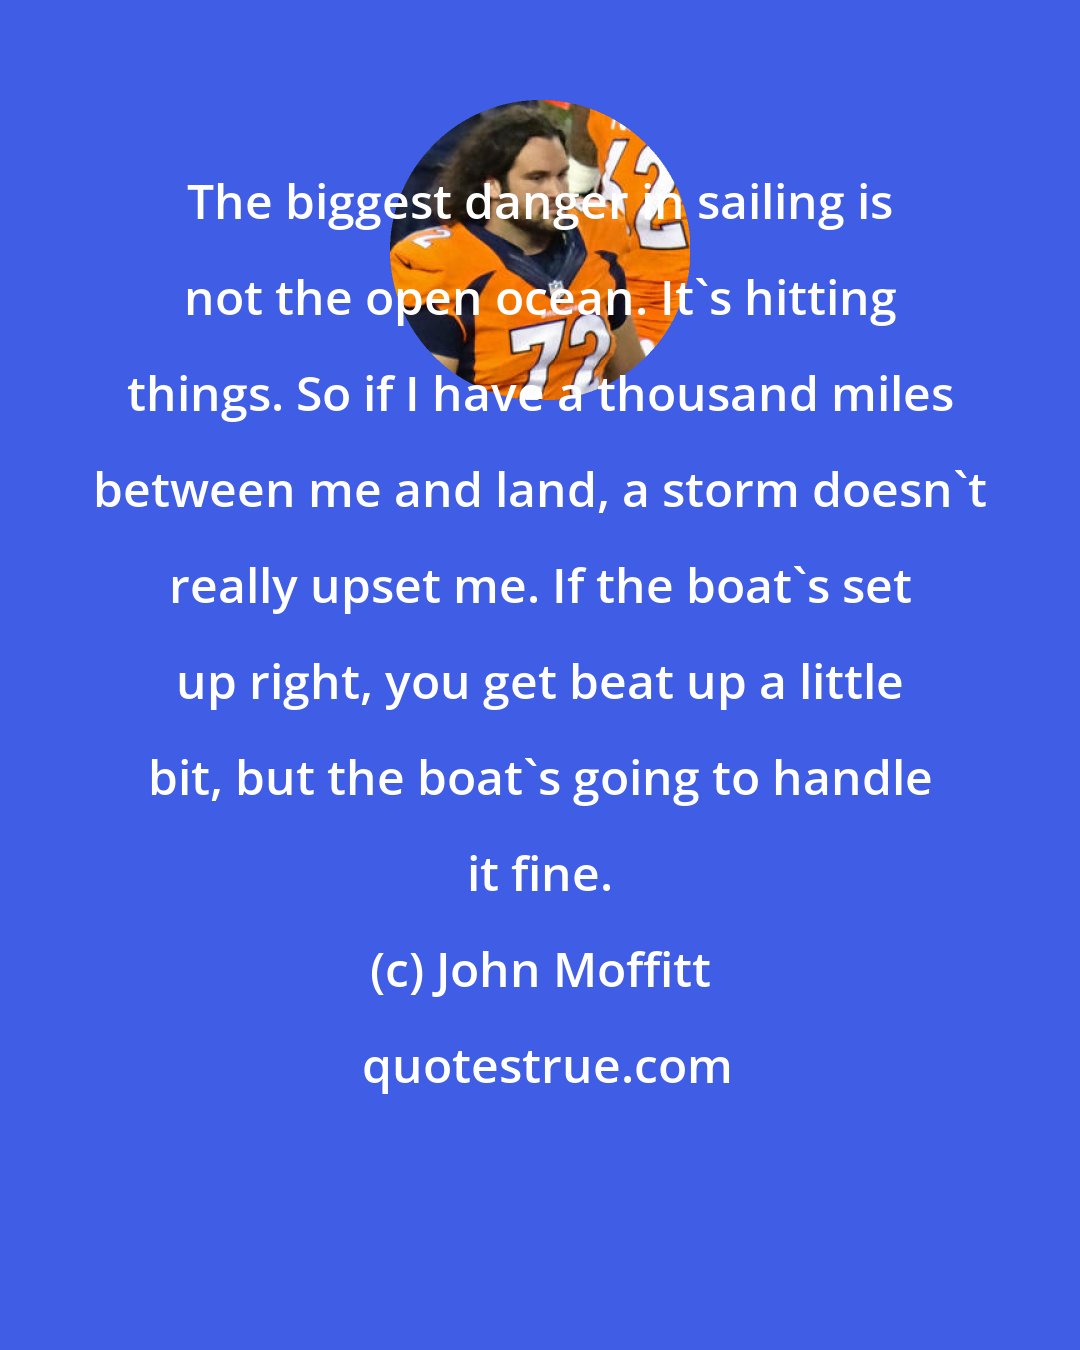 John Moffitt: The biggest danger in sailing is not the open ocean. It's hitting things. So if I have a thousand miles between me and land, a storm doesn't really upset me. If the boat's set up right, you get beat up a little bit, but the boat's going to handle it fine.